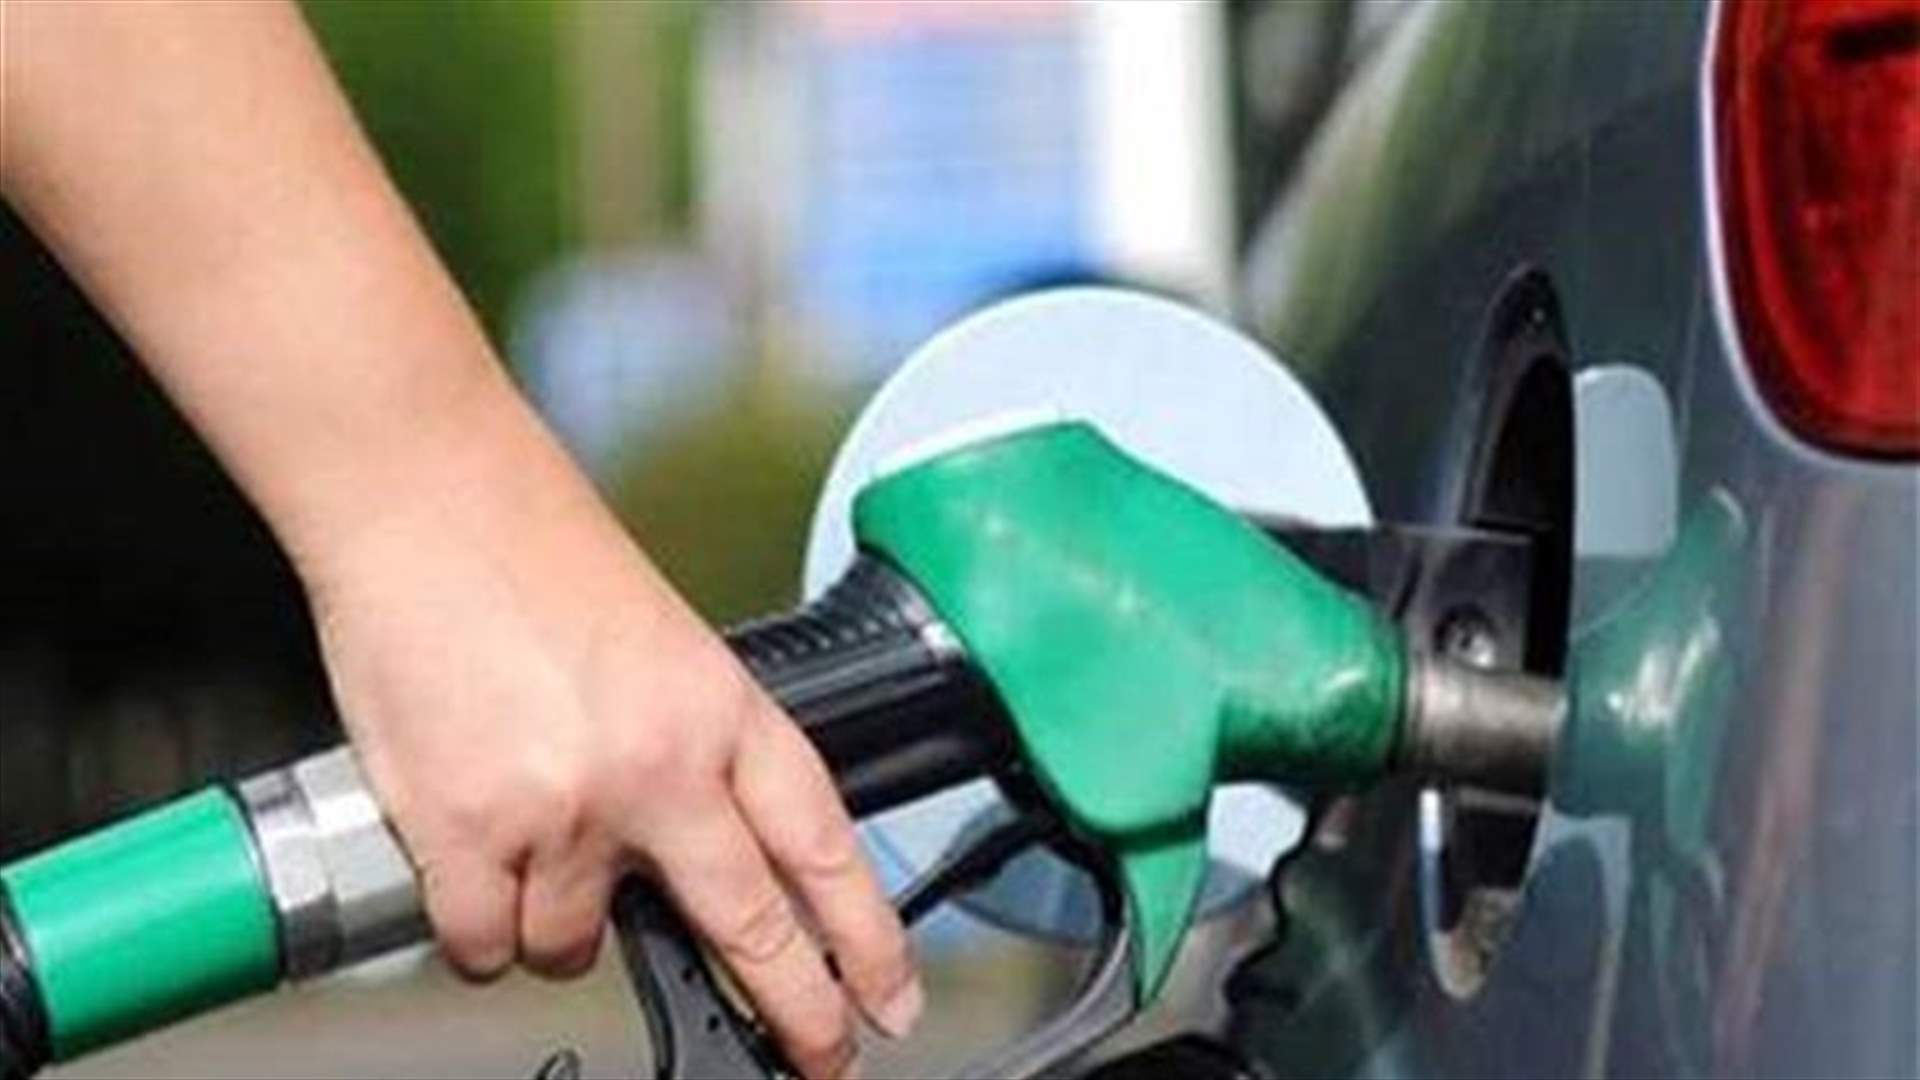 Price of 95 octane fuel remains unchanged